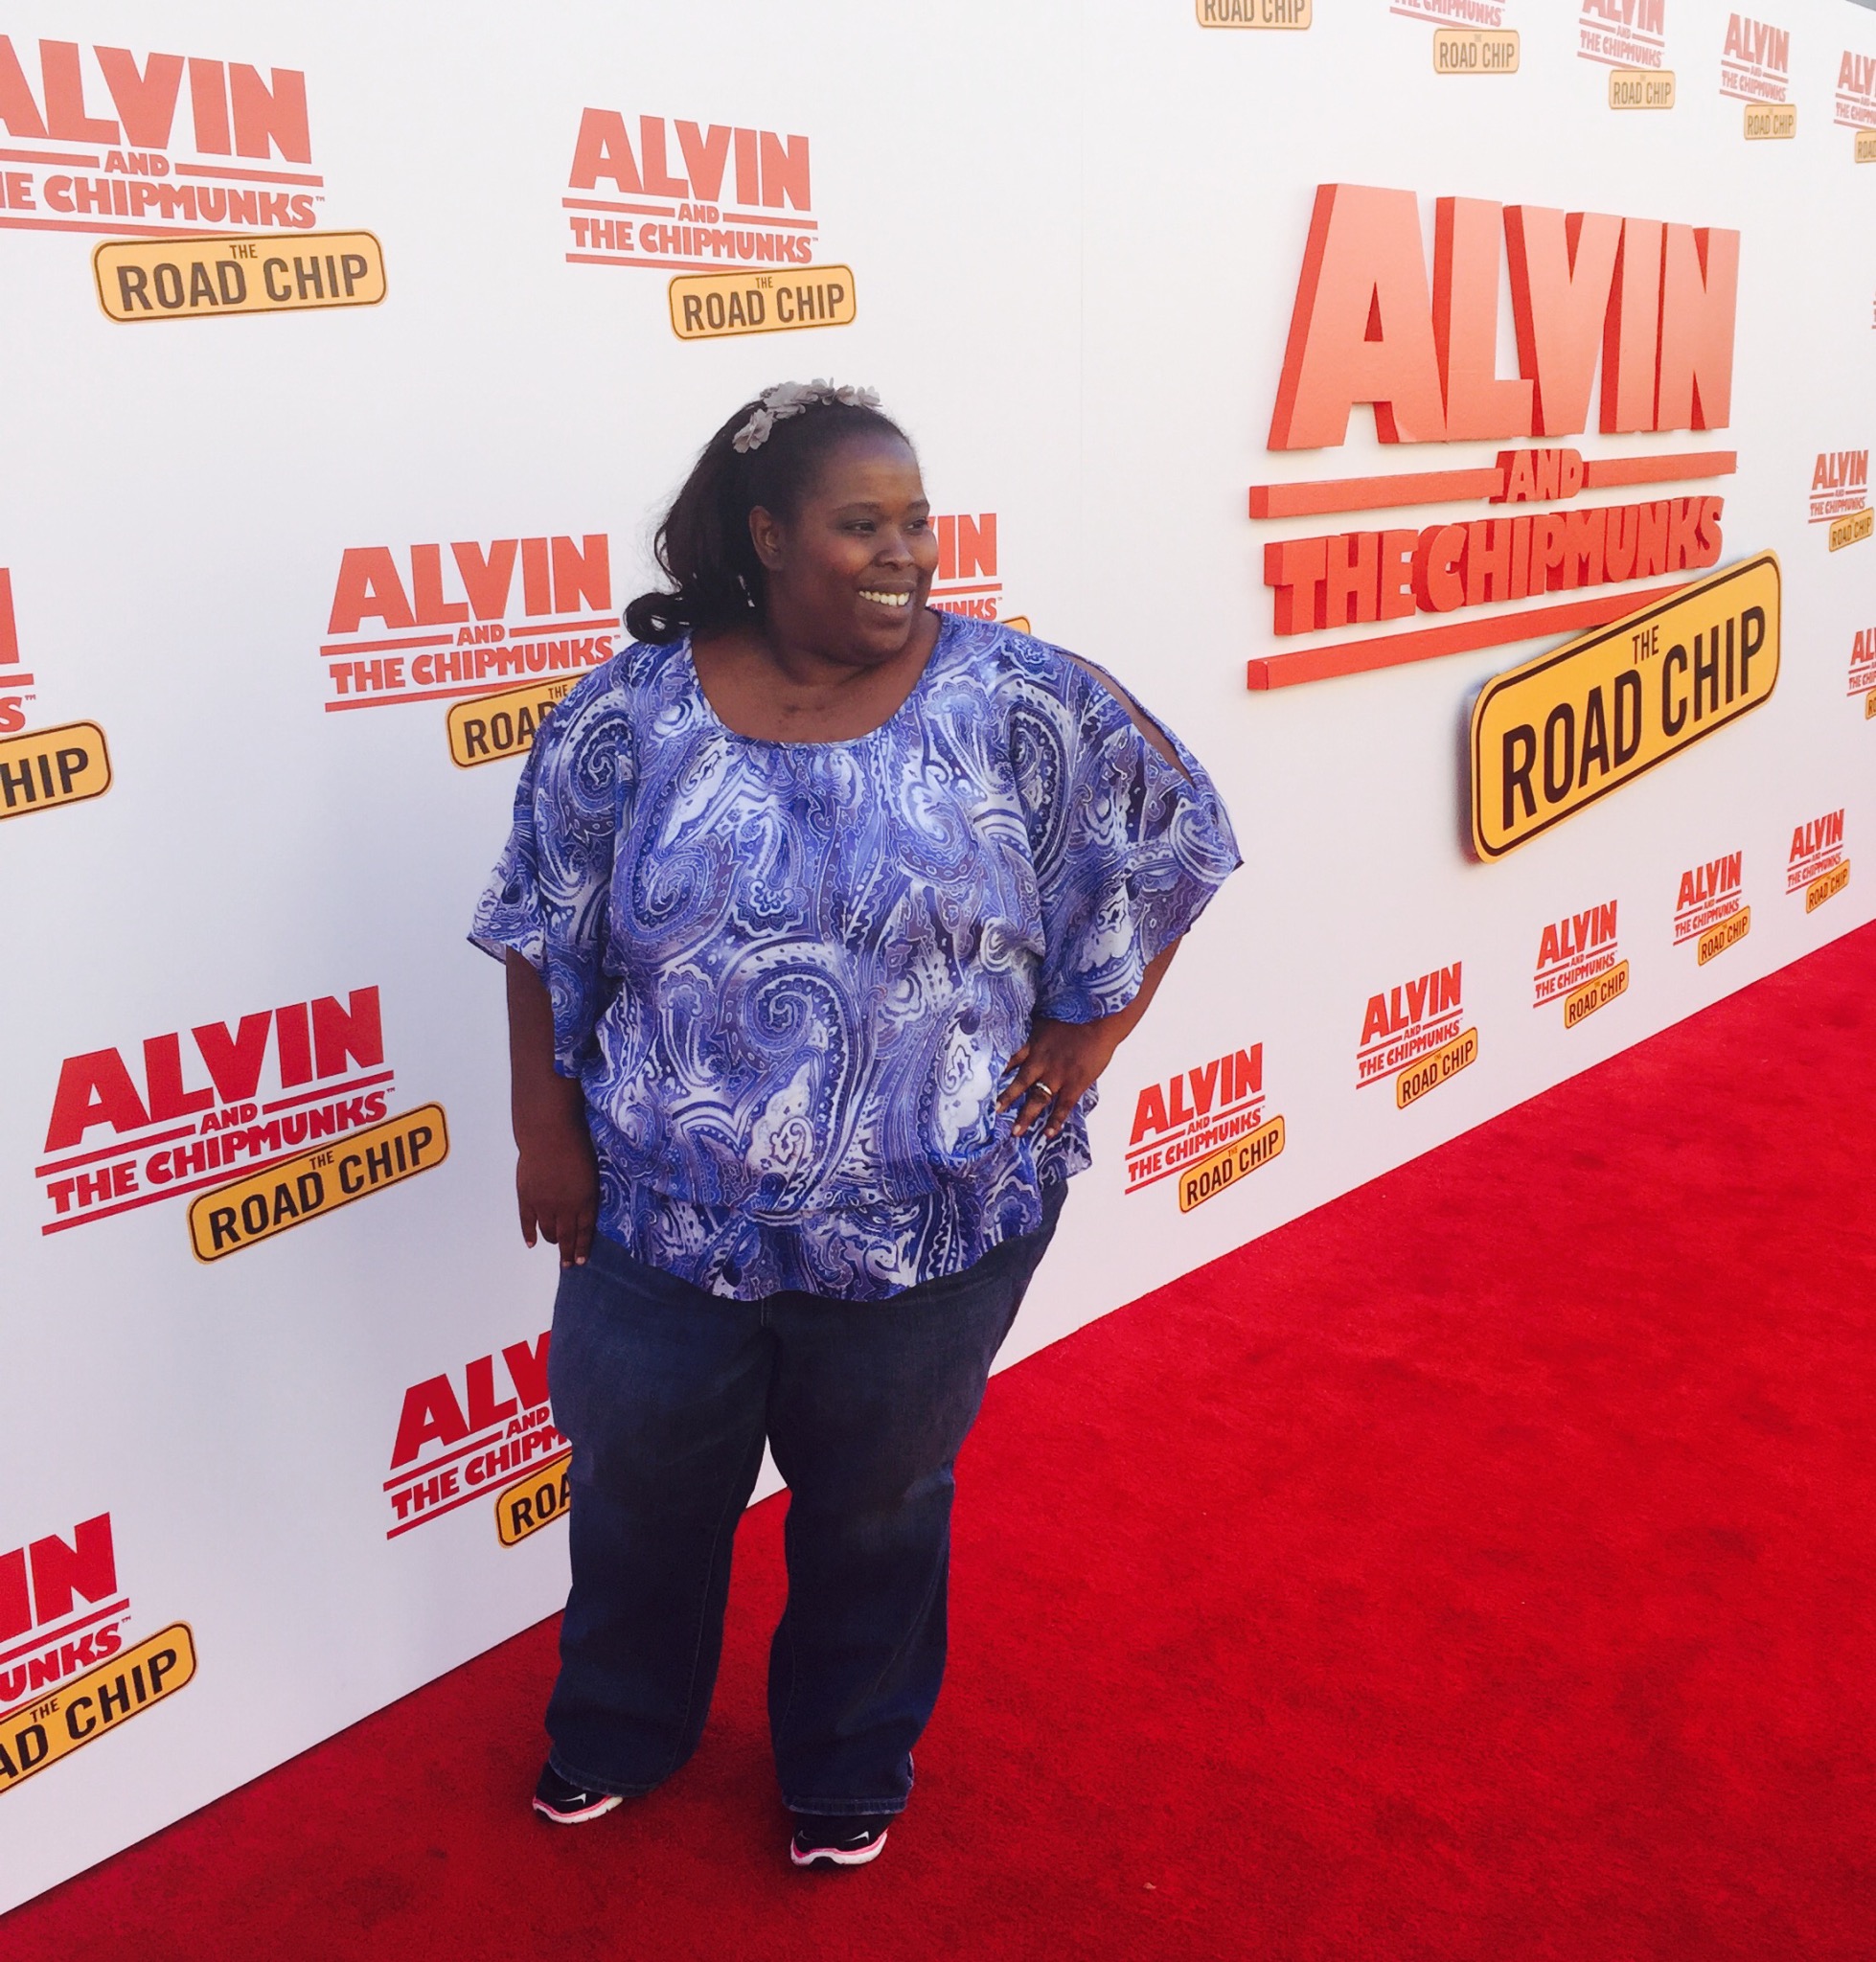 mrs kathey king at the red carpet premiere of alvin and the chipmunks road chip